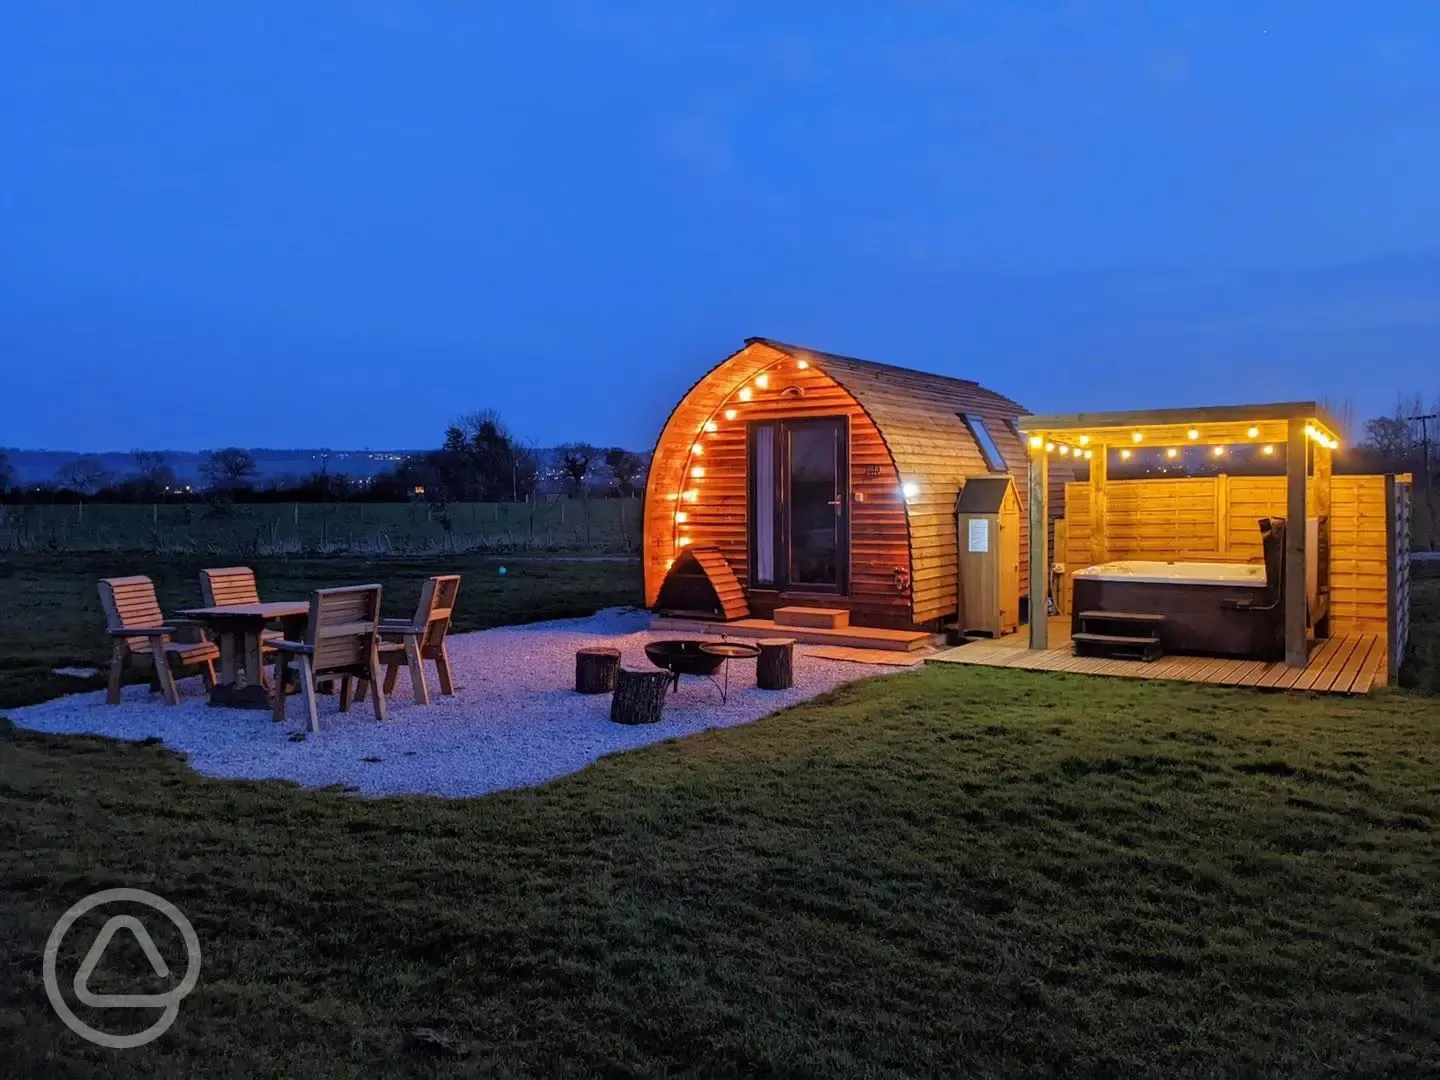 Ensuite Deluxe Wigwam Pod with electric hot tub at night